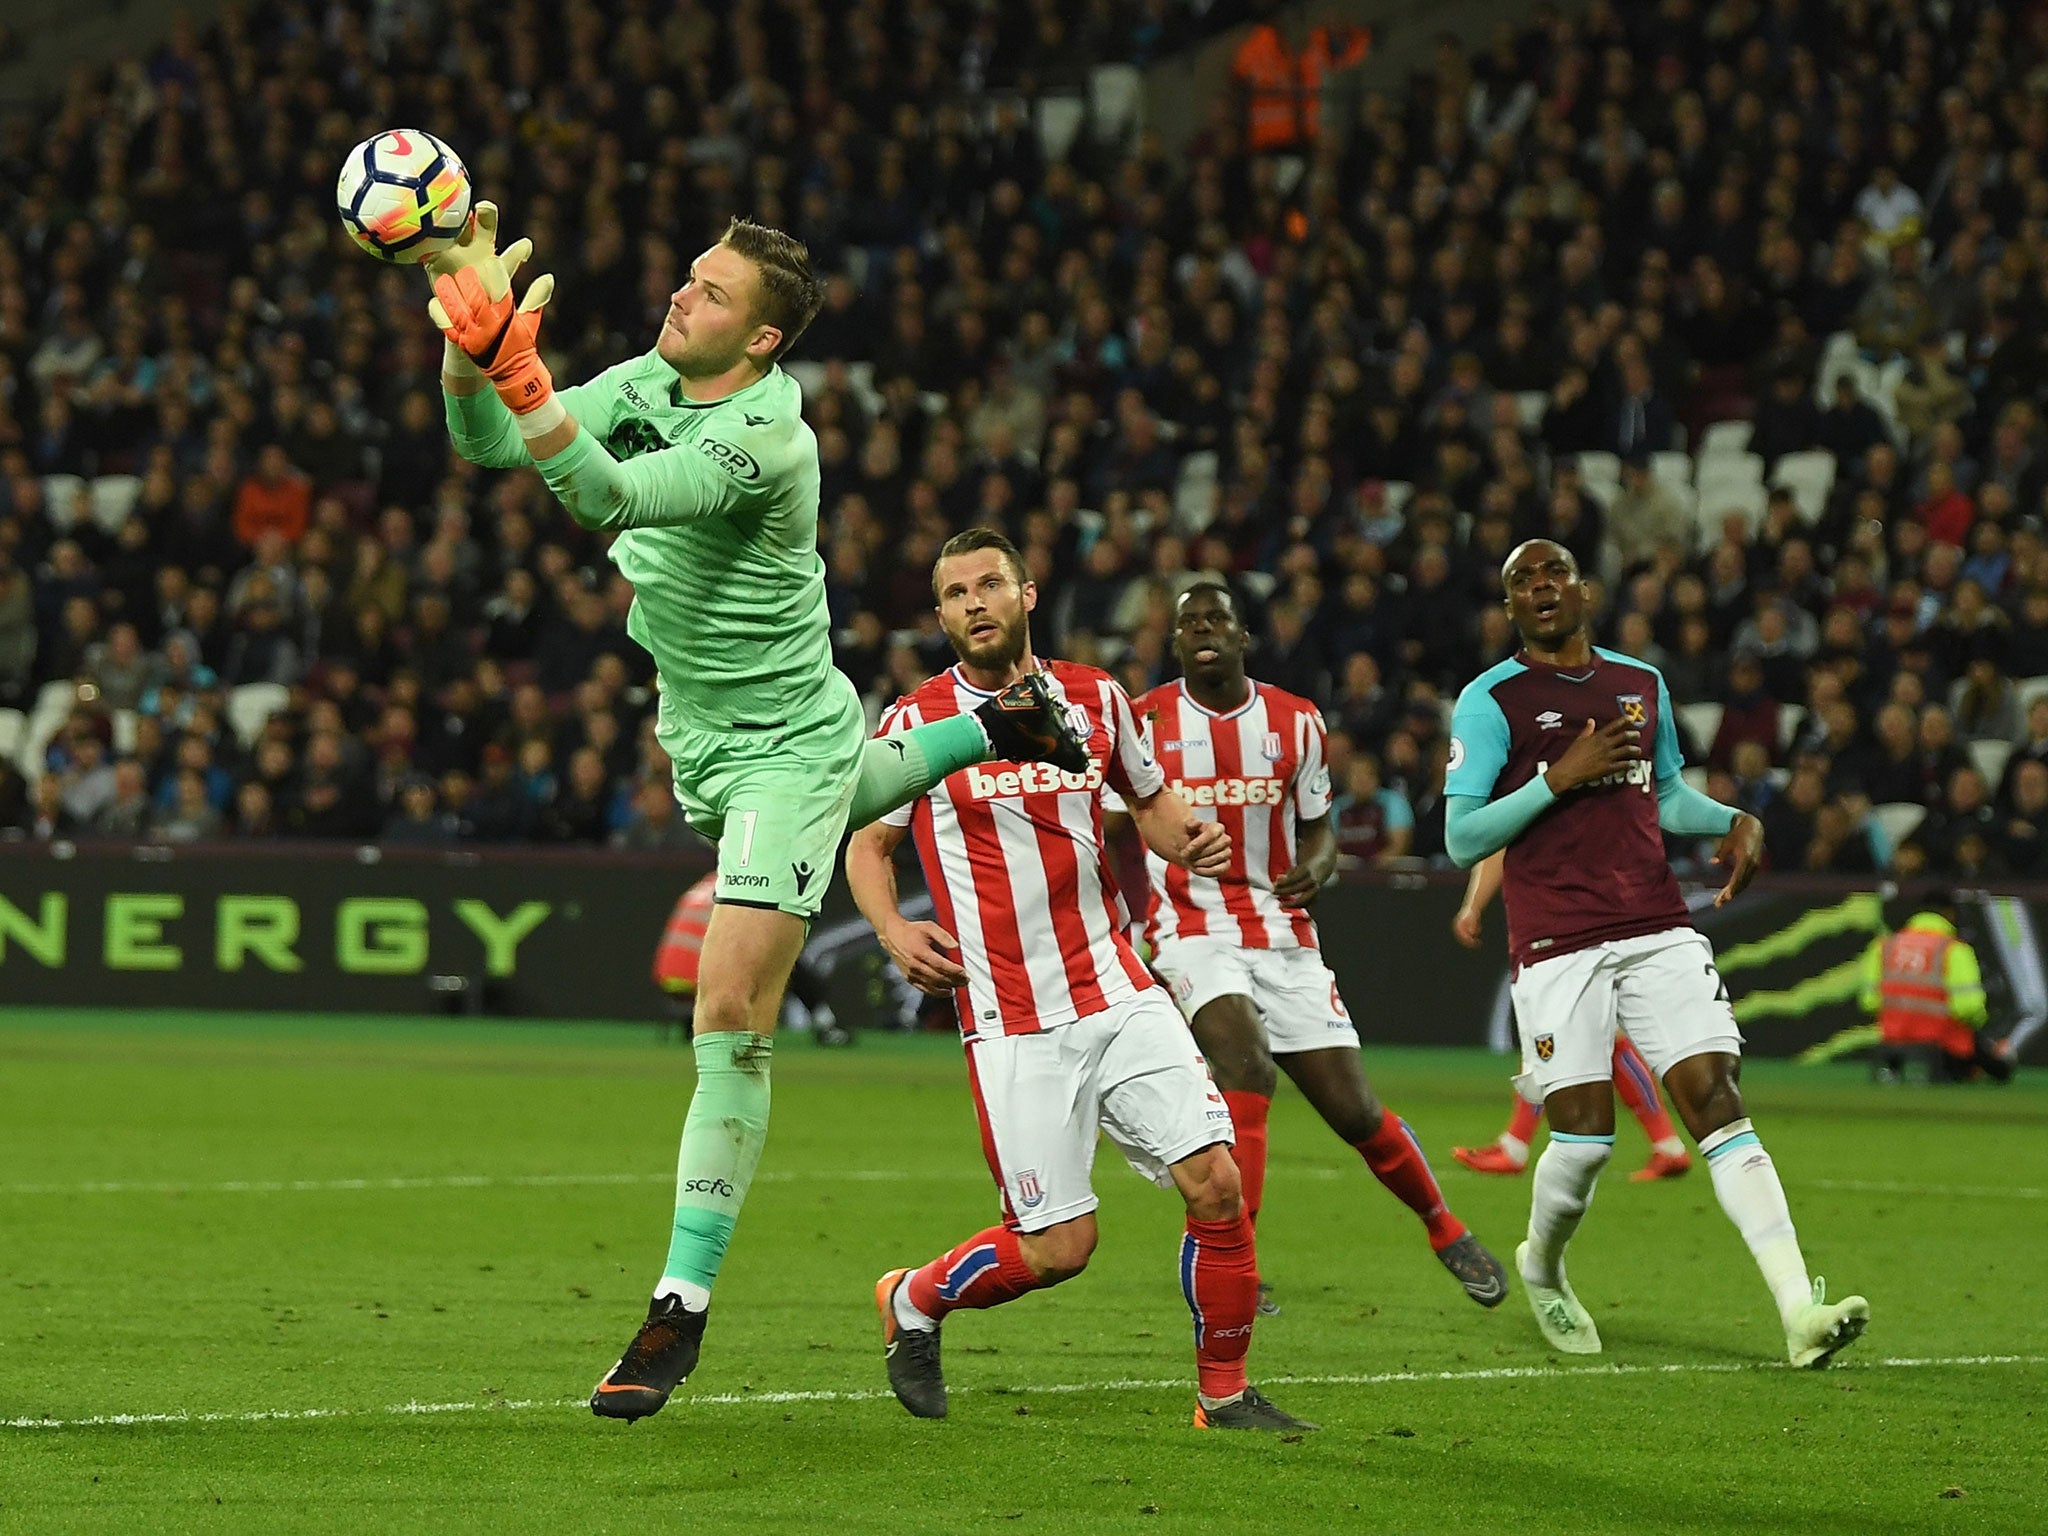 Jack Butland looks to be staying put at Stoke